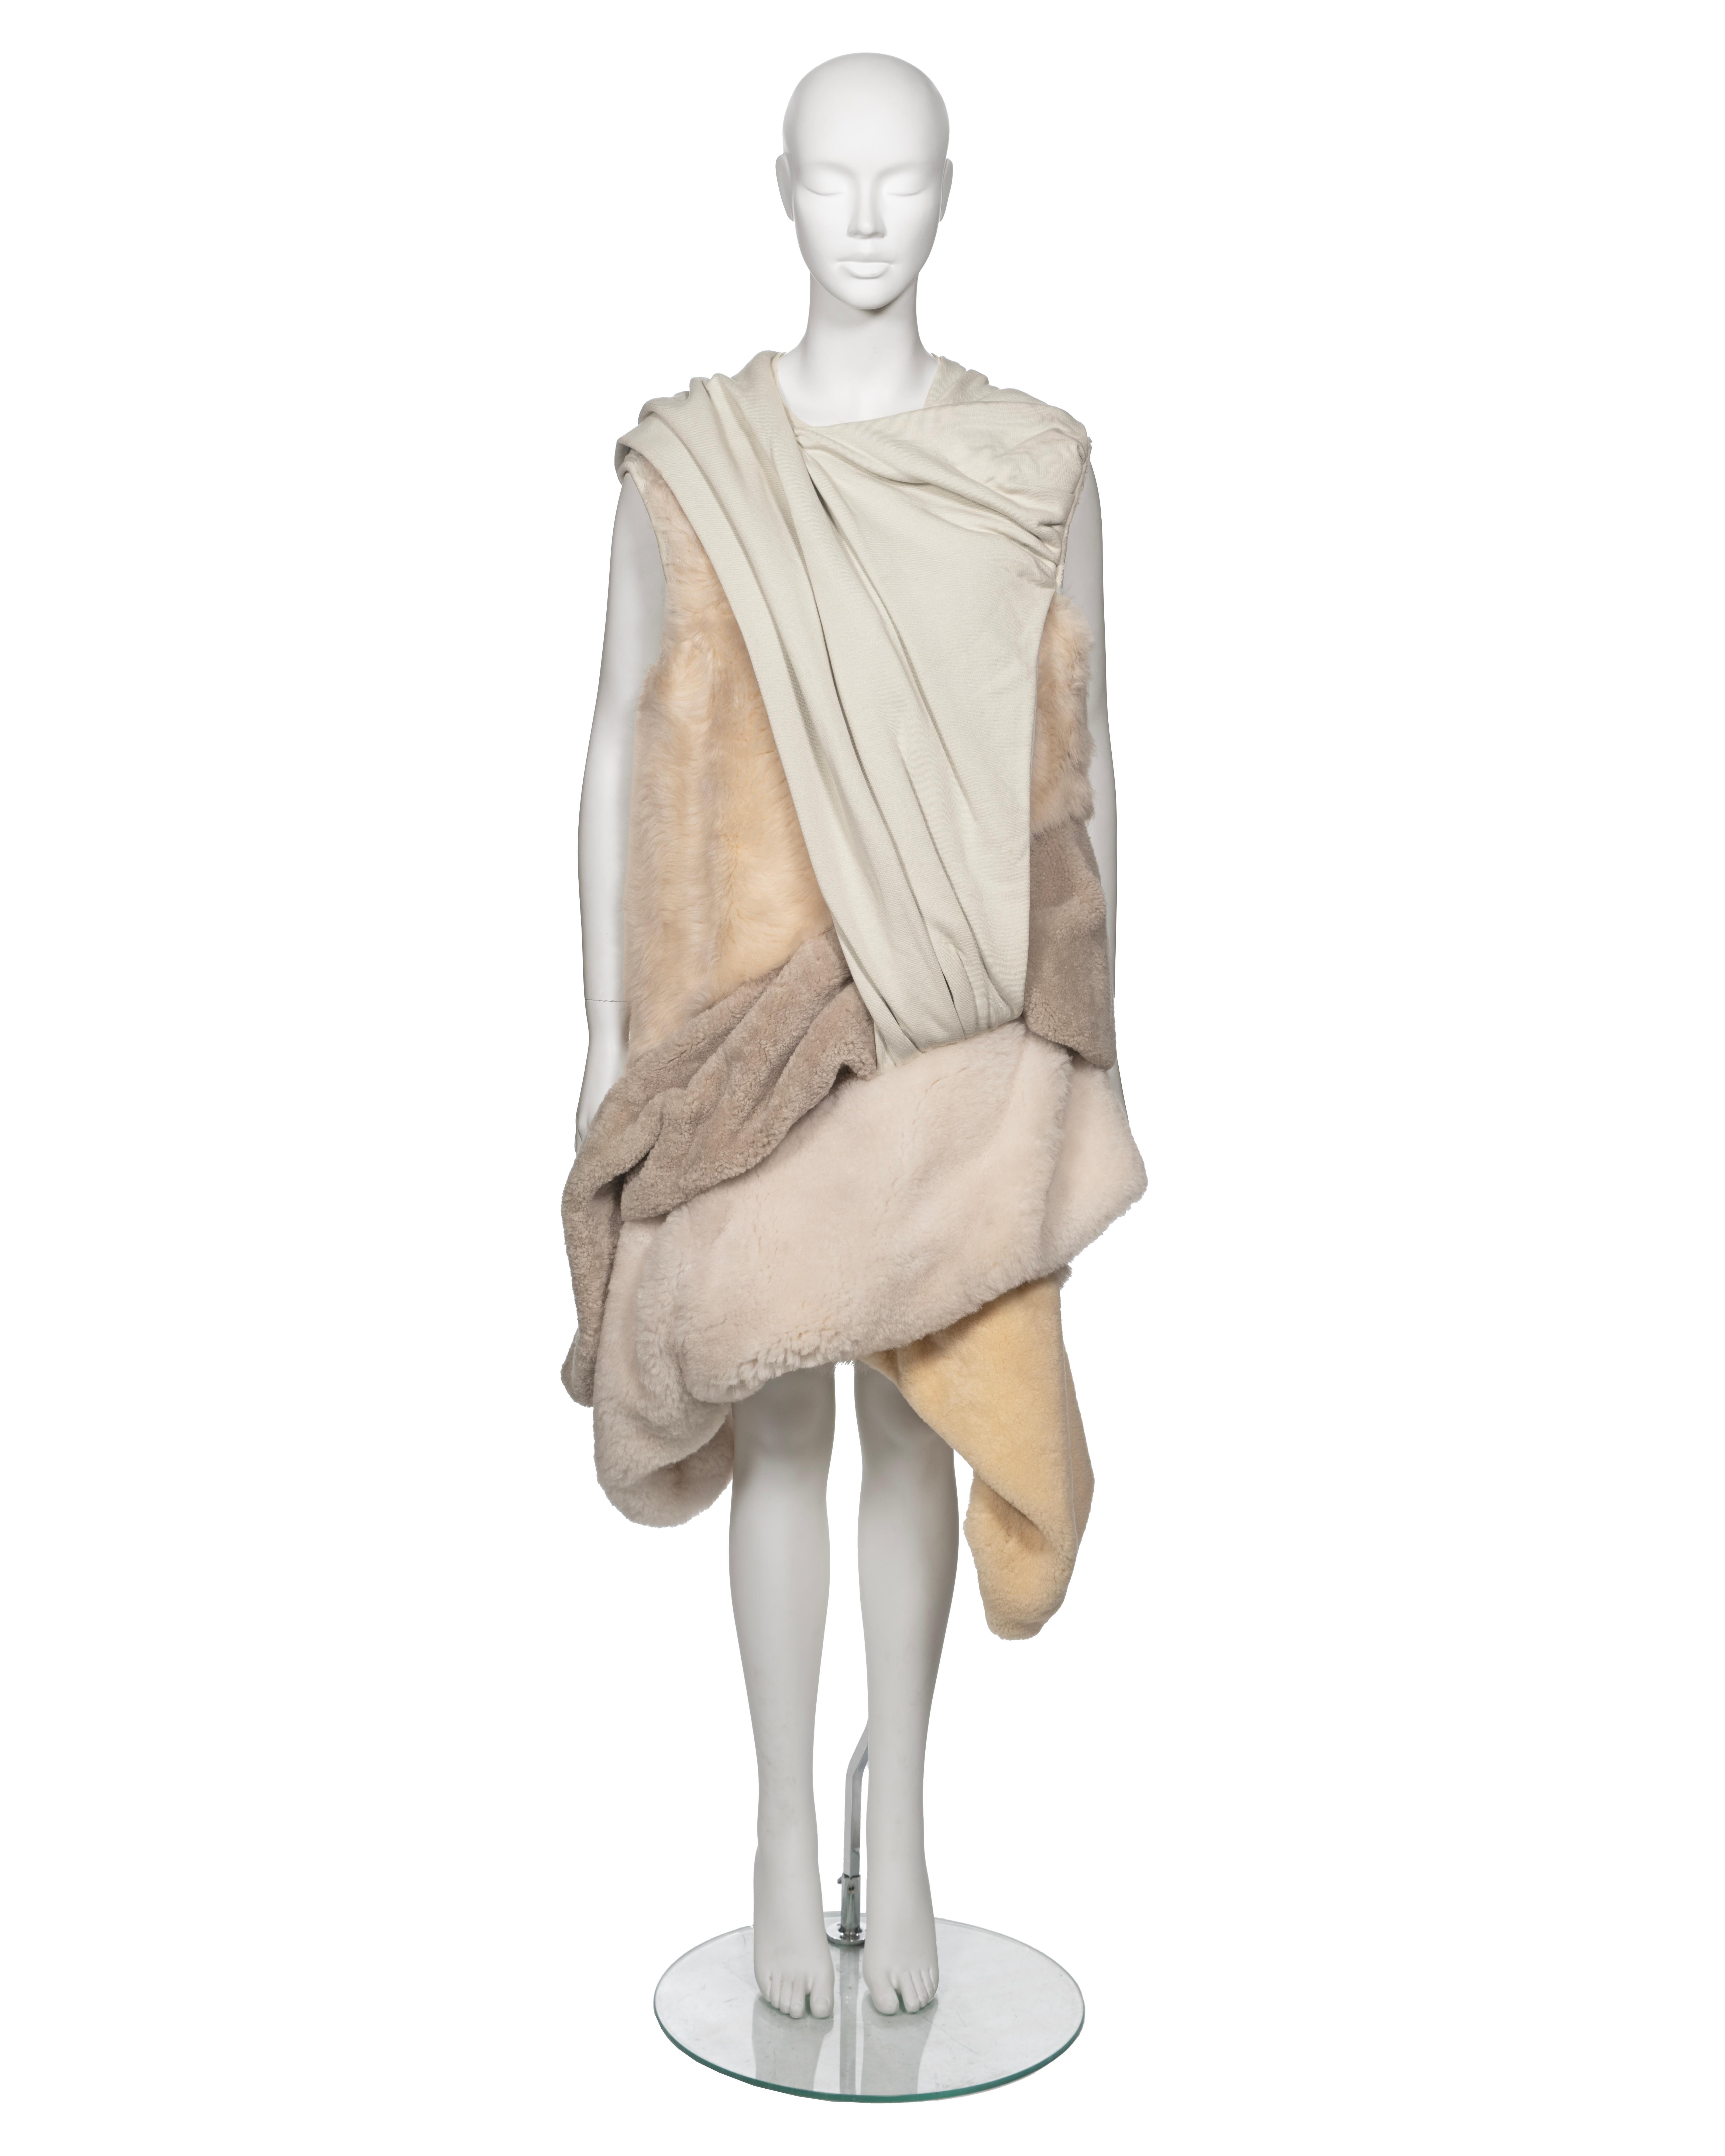 ▪ Archival Rick Owens 'Mastodon' Dress
▪ Fall-Winter 2016
▪ Crafted from intricately intertwined layers of draped shearling, sheepskin, and thick cotton jersey
▪ Boasts an oversized fit
▪ Robust heavyweight construction
▪ With only a select number